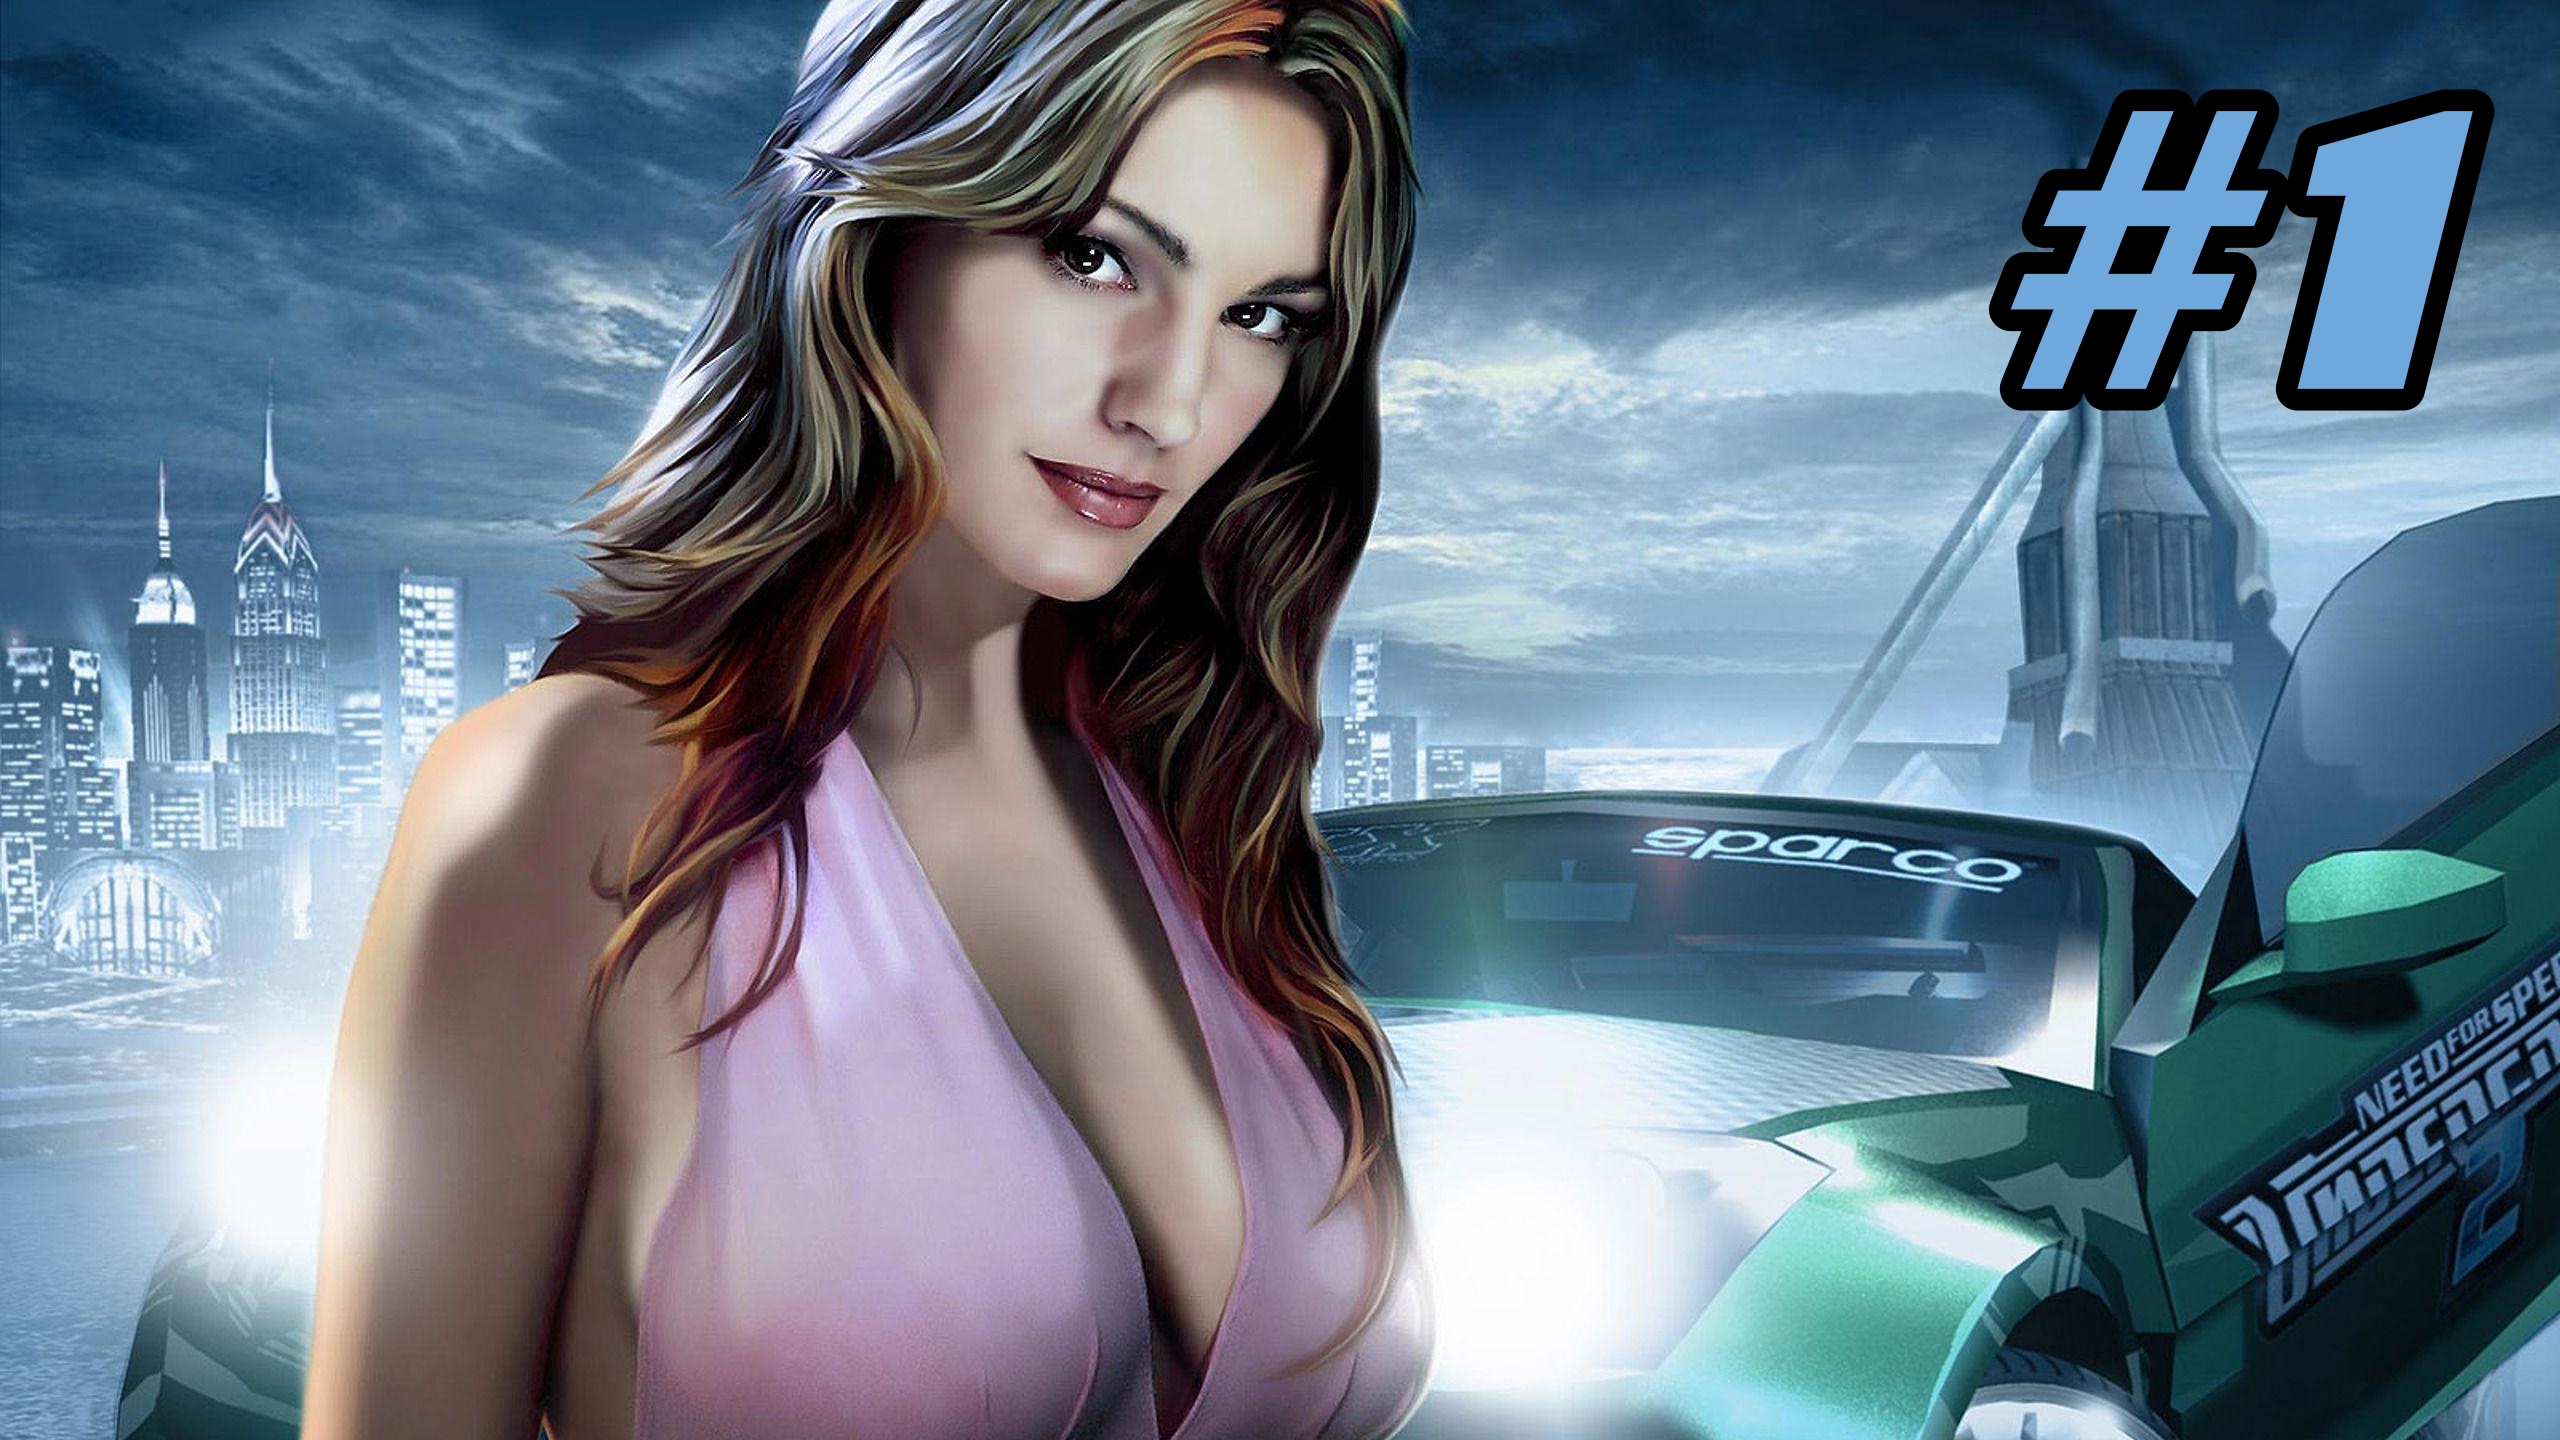 Nfs 2 mobile. Need for Speed Underground 2 Рэйчел Теллер. Келли Брук need for Speed. Келли Брук need for Speed Underground 2.